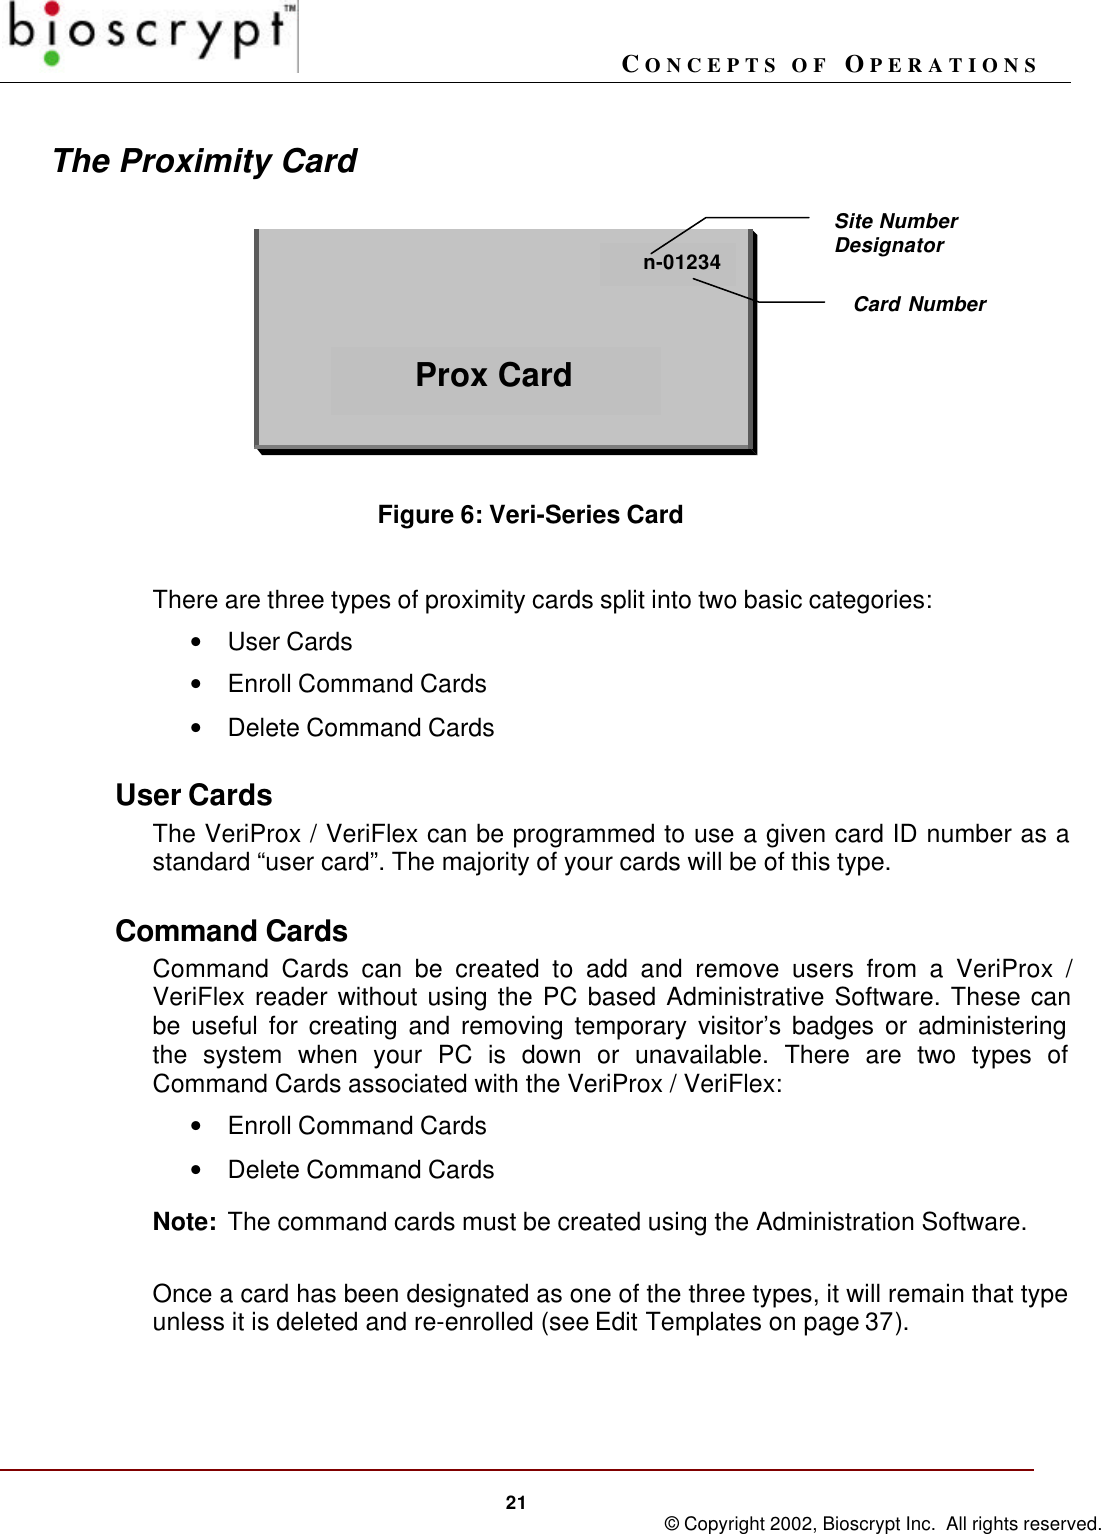 CONCEPTS OF OPERATIONS21 © Copyright 2002, Bioscrypt Inc.  All rights reserved.The Proximity CardFigure 6: Veri-Series CardThere are three types of proximity cards split into two basic categories:• User Cards• Enroll Command Cards• Delete Command CardsUser CardsThe VeriProx / VeriFlex can be programmed to use a given card ID number as astandard “user card”. The majority of your cards will be of this type.Command CardsCommand Cards can be created to add and remove users from a VeriProx /VeriFlex reader without using the PC based Administrative Software. These canbe useful for creating and removing temporary visitor’s badges or administeringthe system when your PC is down or unavailable. There are two types ofCommand Cards associated with the VeriProx / VeriFlex:• Enroll Command Cards• Delete Command CardsNote: The command cards must be created using the Administration Software.Once a card has been designated as one of the three types, it will remain that typeunless it is deleted and re-enrolled (see Edit Templates on page 37).n-01234Prox CardSite NumberDesignatorCard Number